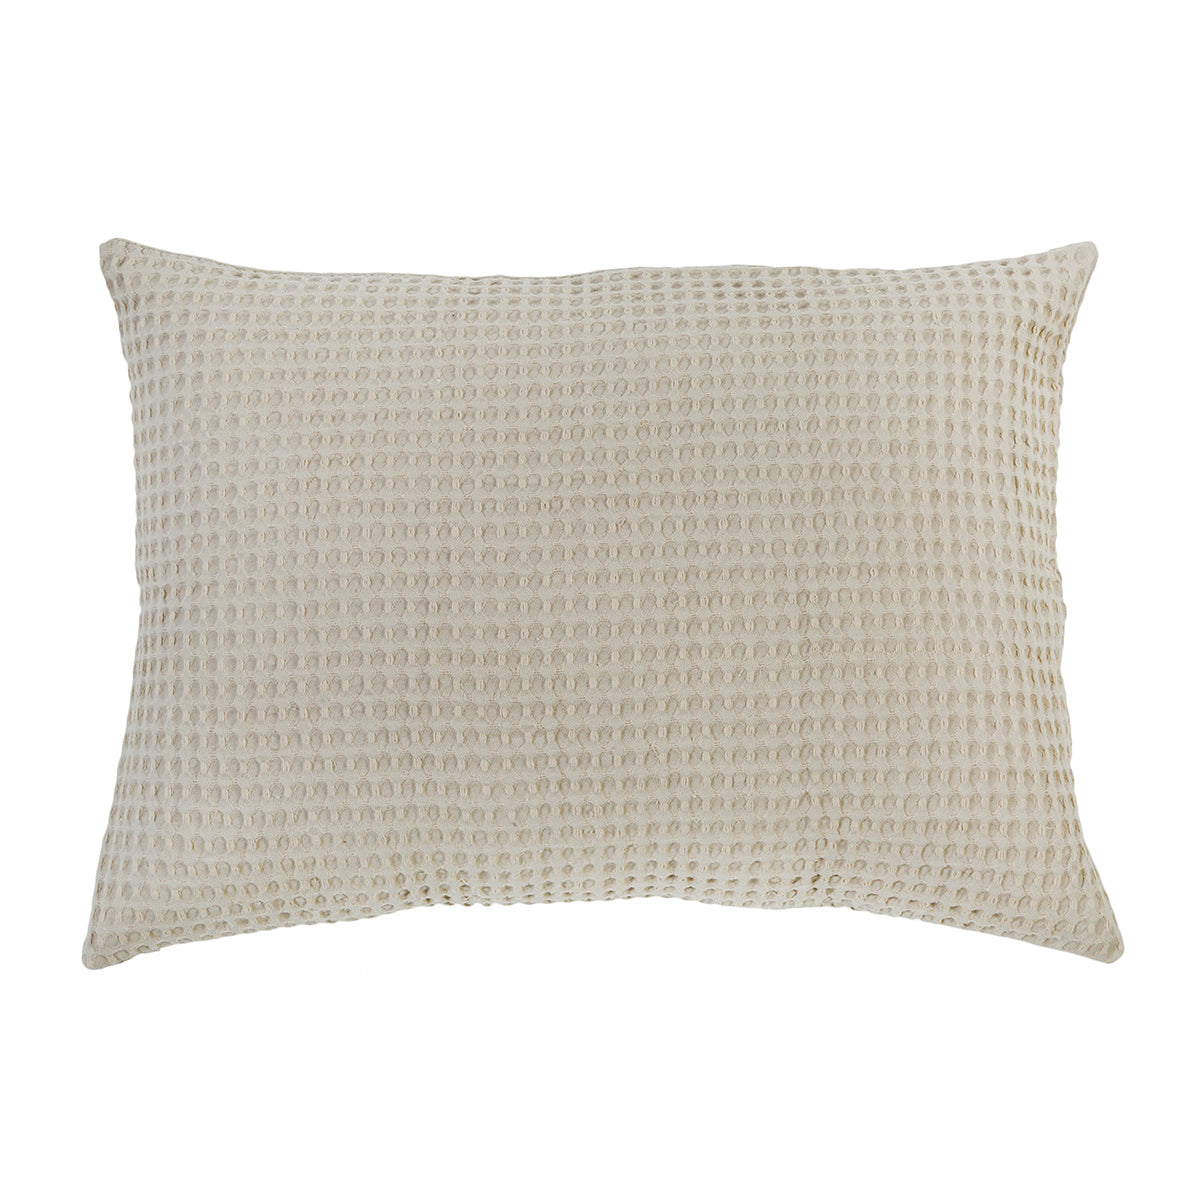 Zuma BIG PILLOW WITH INSERT - 4 colors - pom pom at home